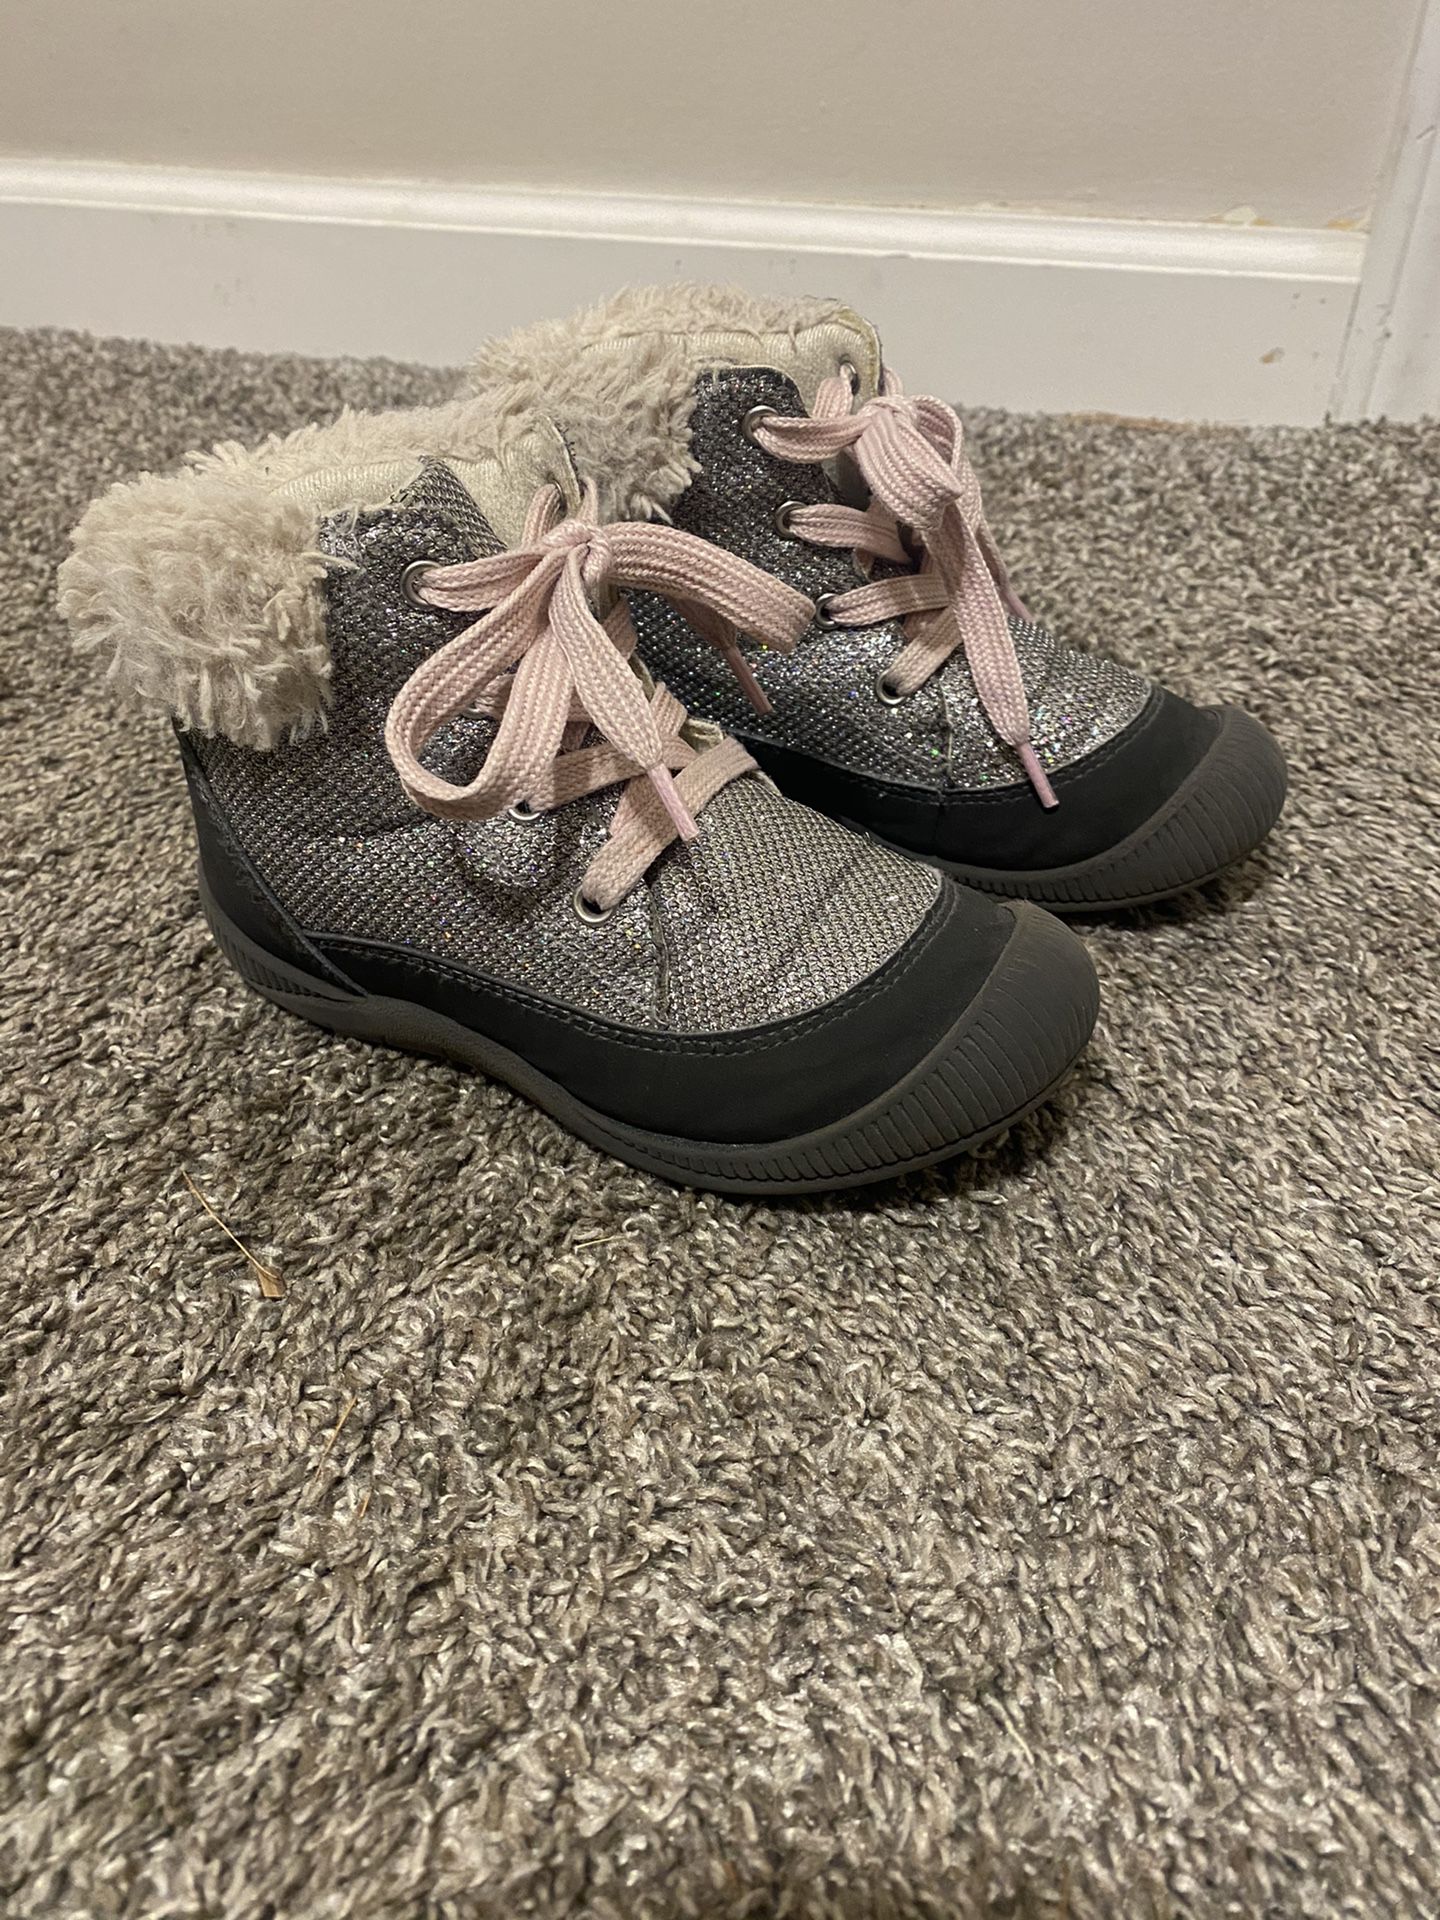 Toddler Girl Boots Size 12c